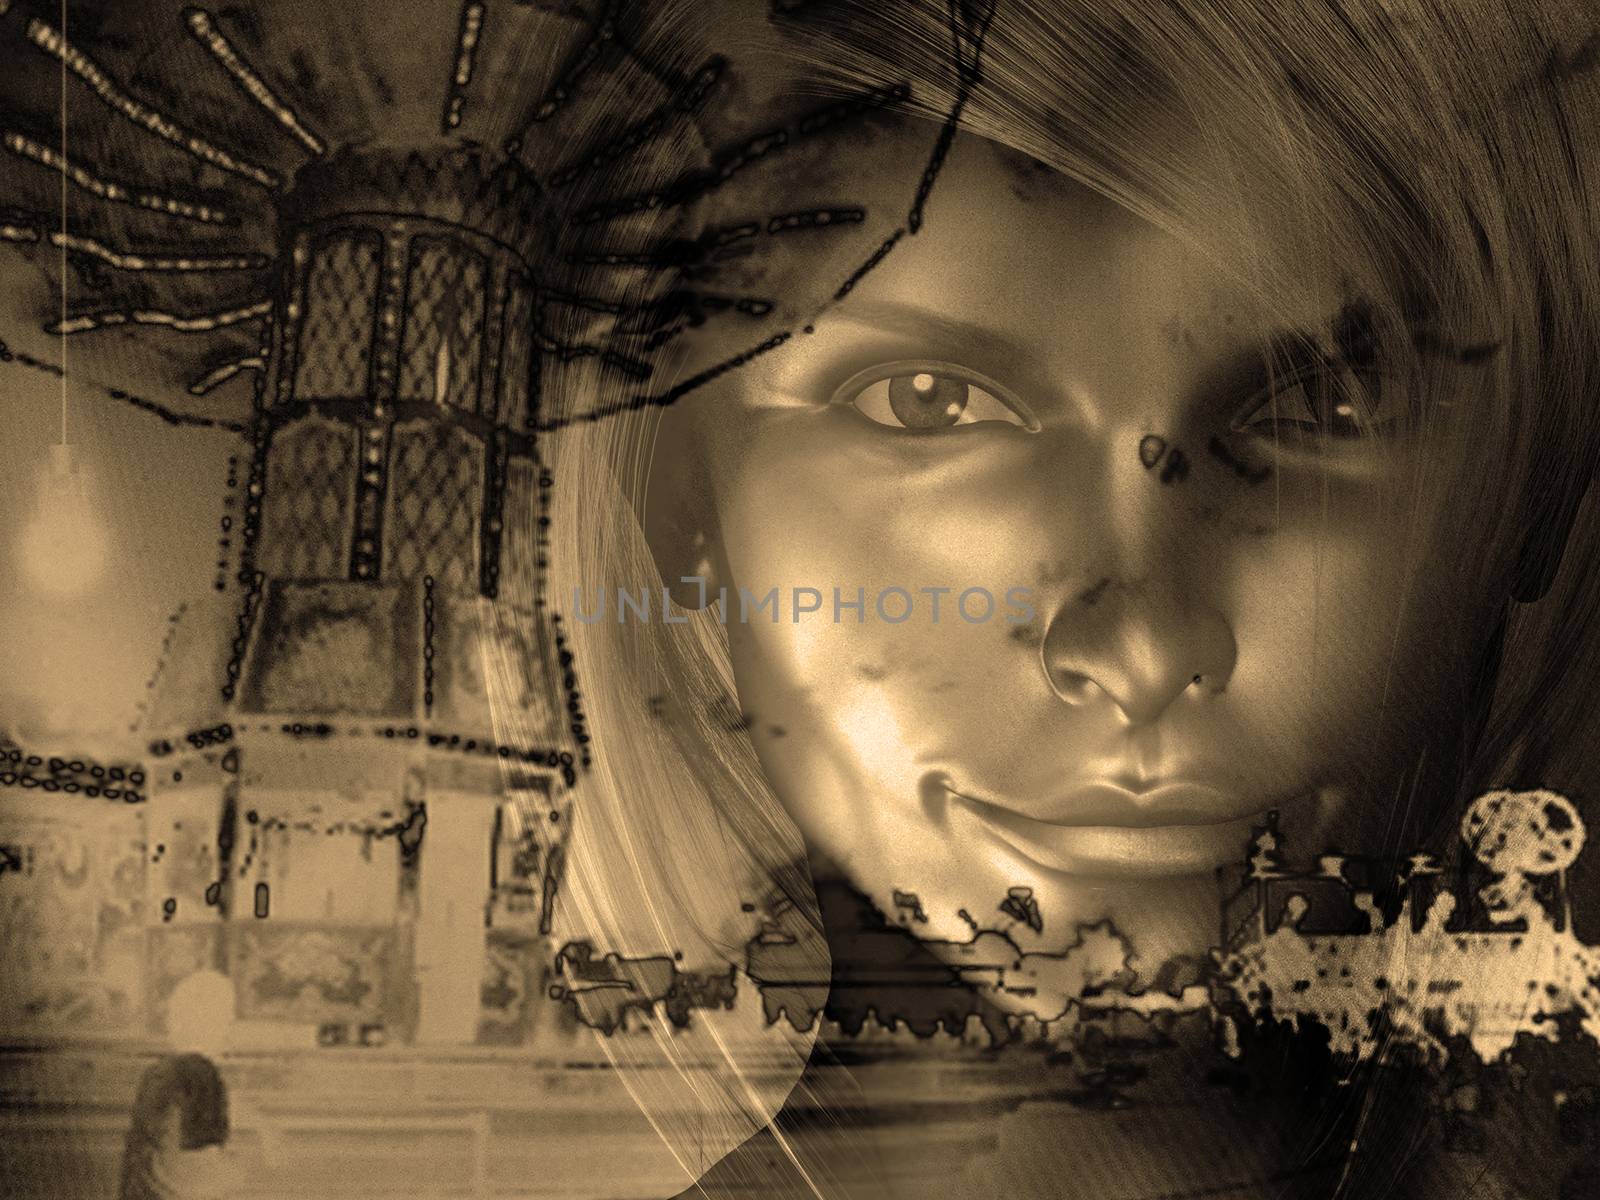 Carnival background. Girl face. Sepia colors